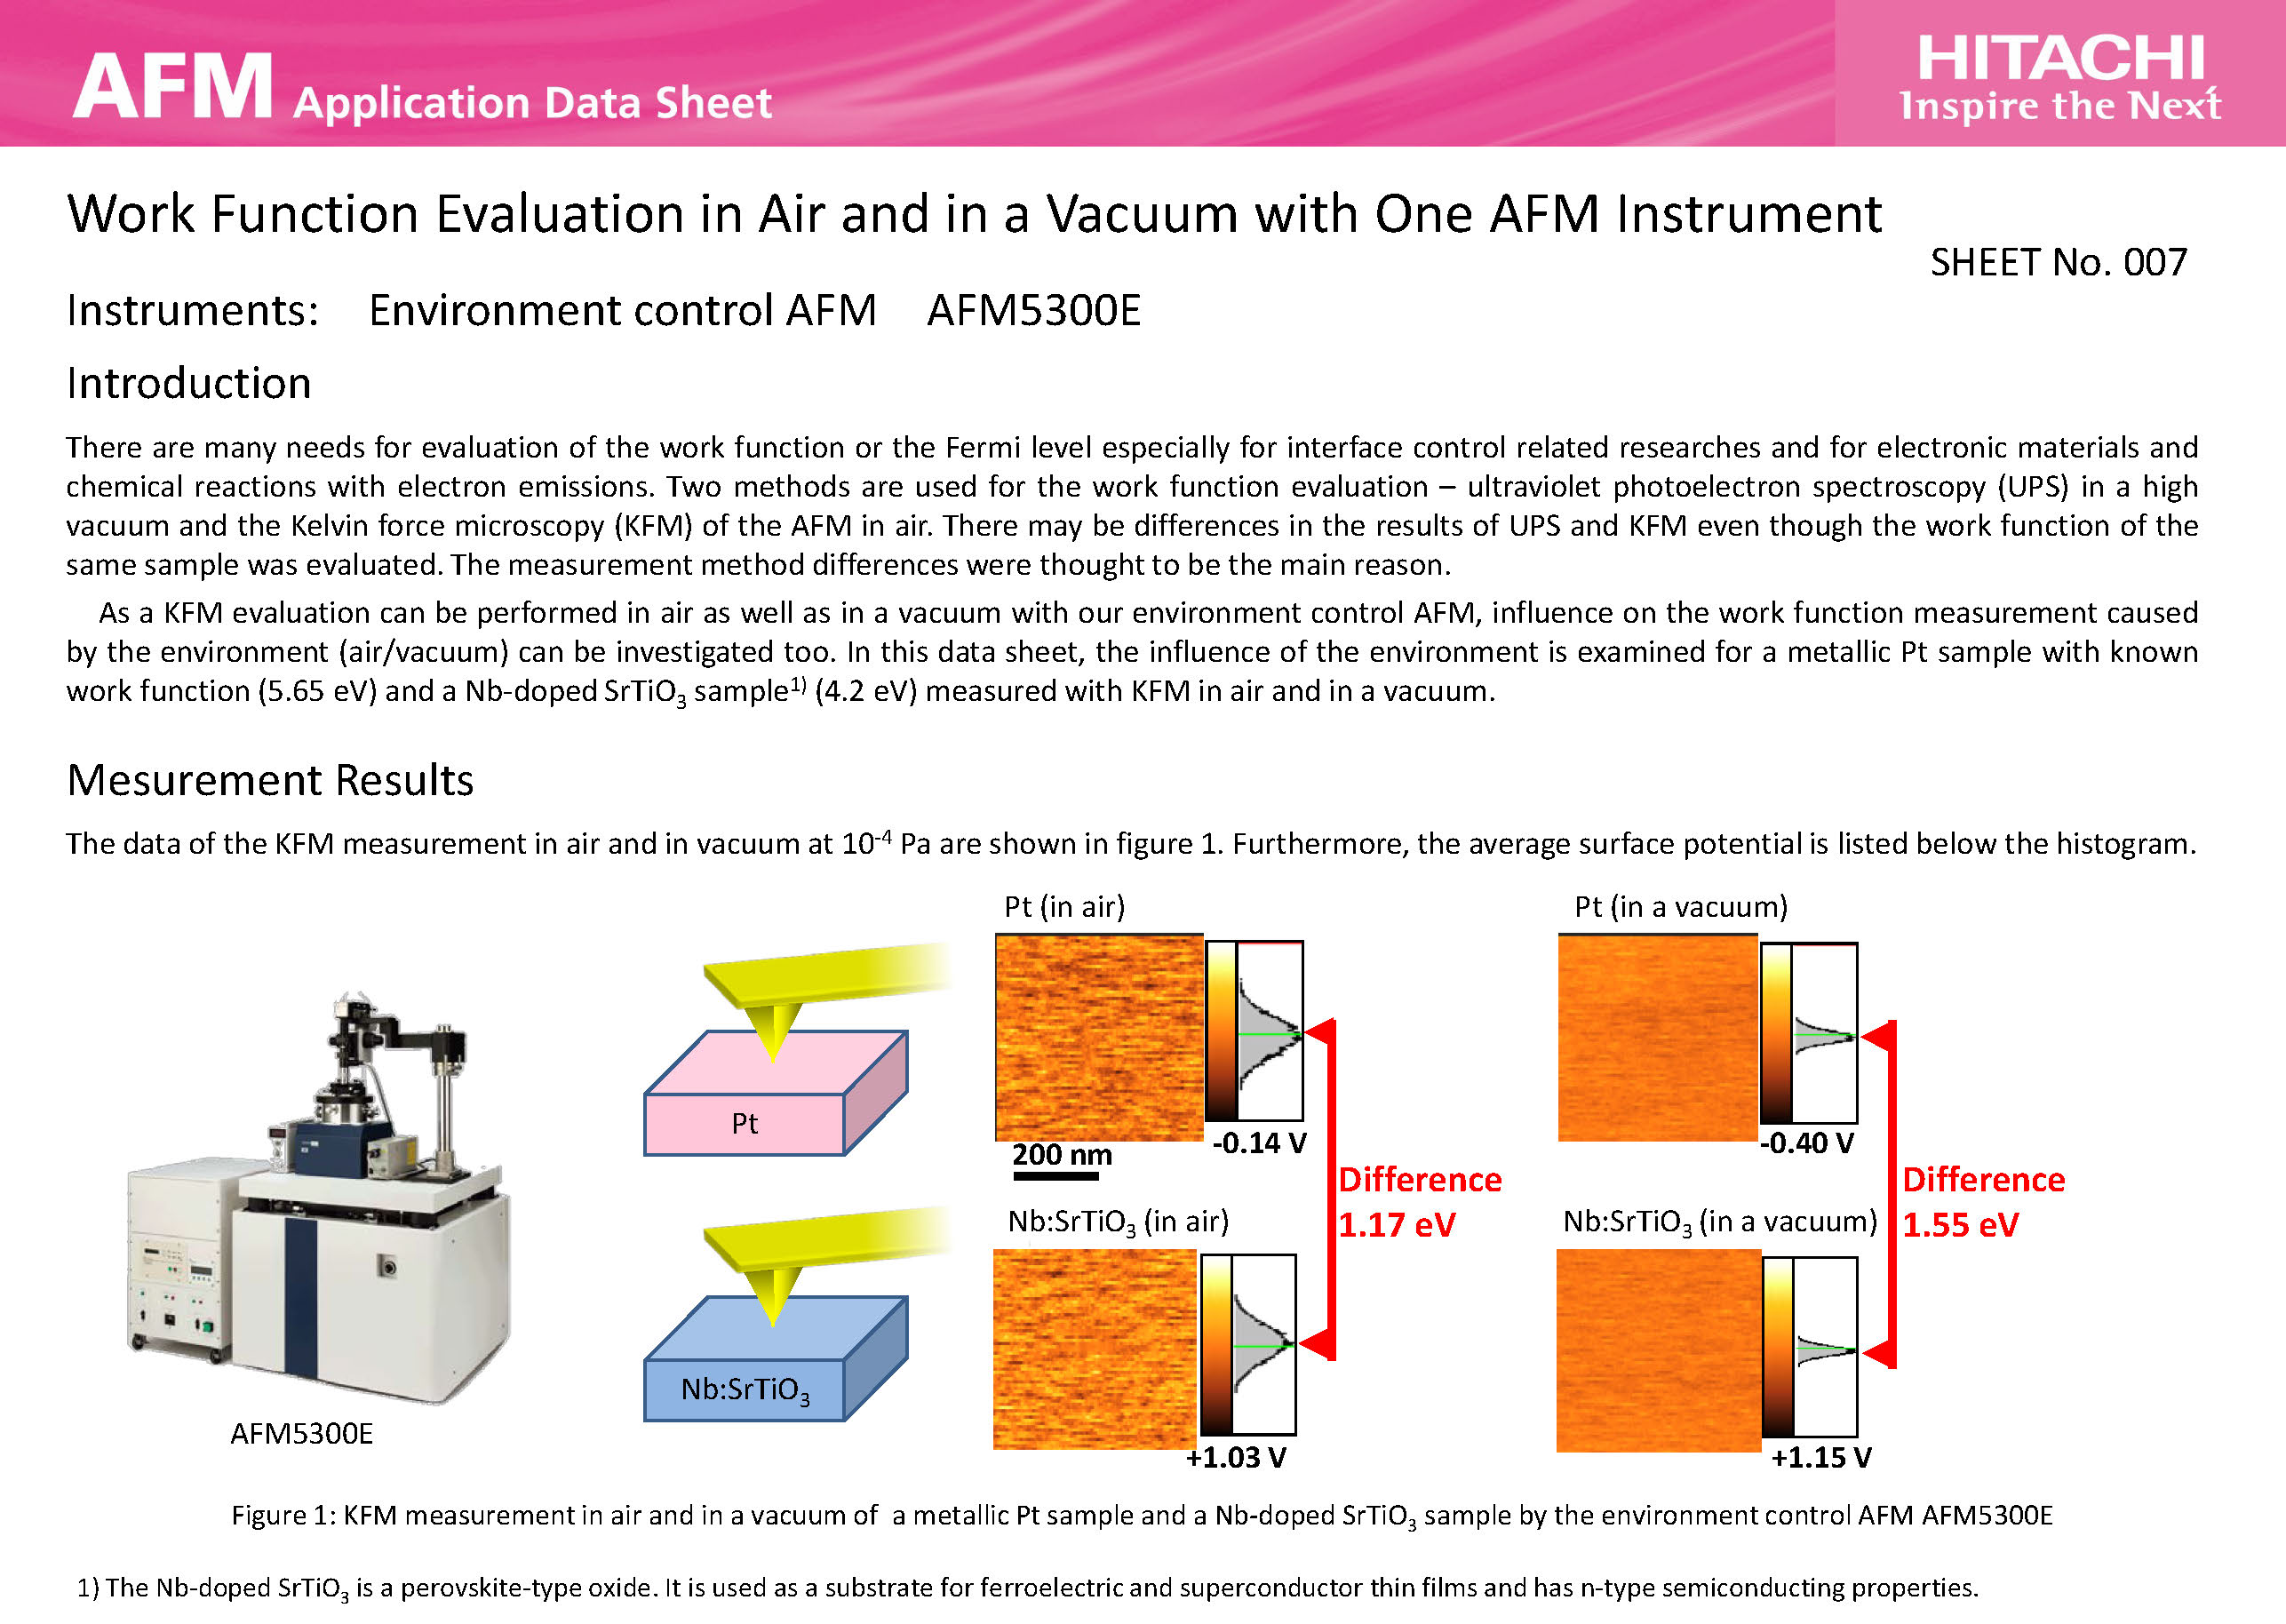 Work Function Evaluation in Air and in a Vacuum with One AFM Instrument